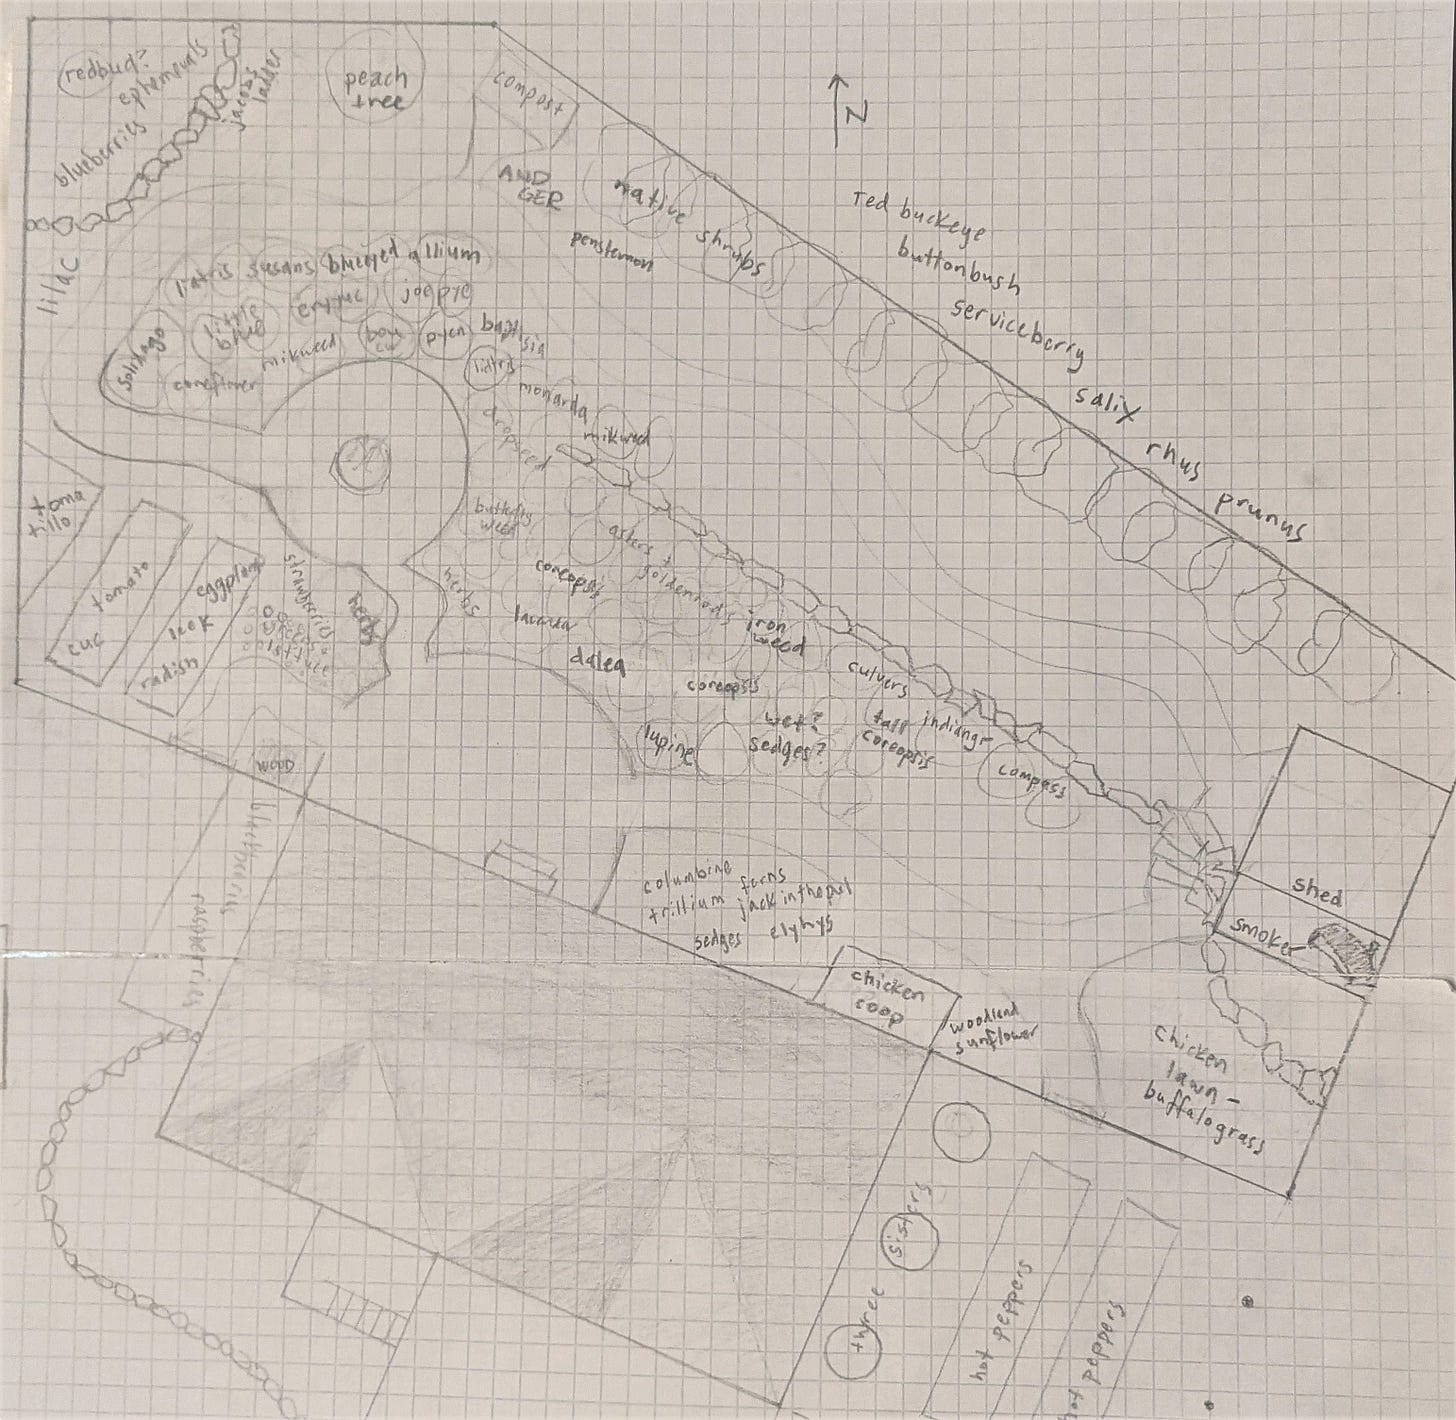 Pencil sketch on graph paper showing the layout of a backyard.